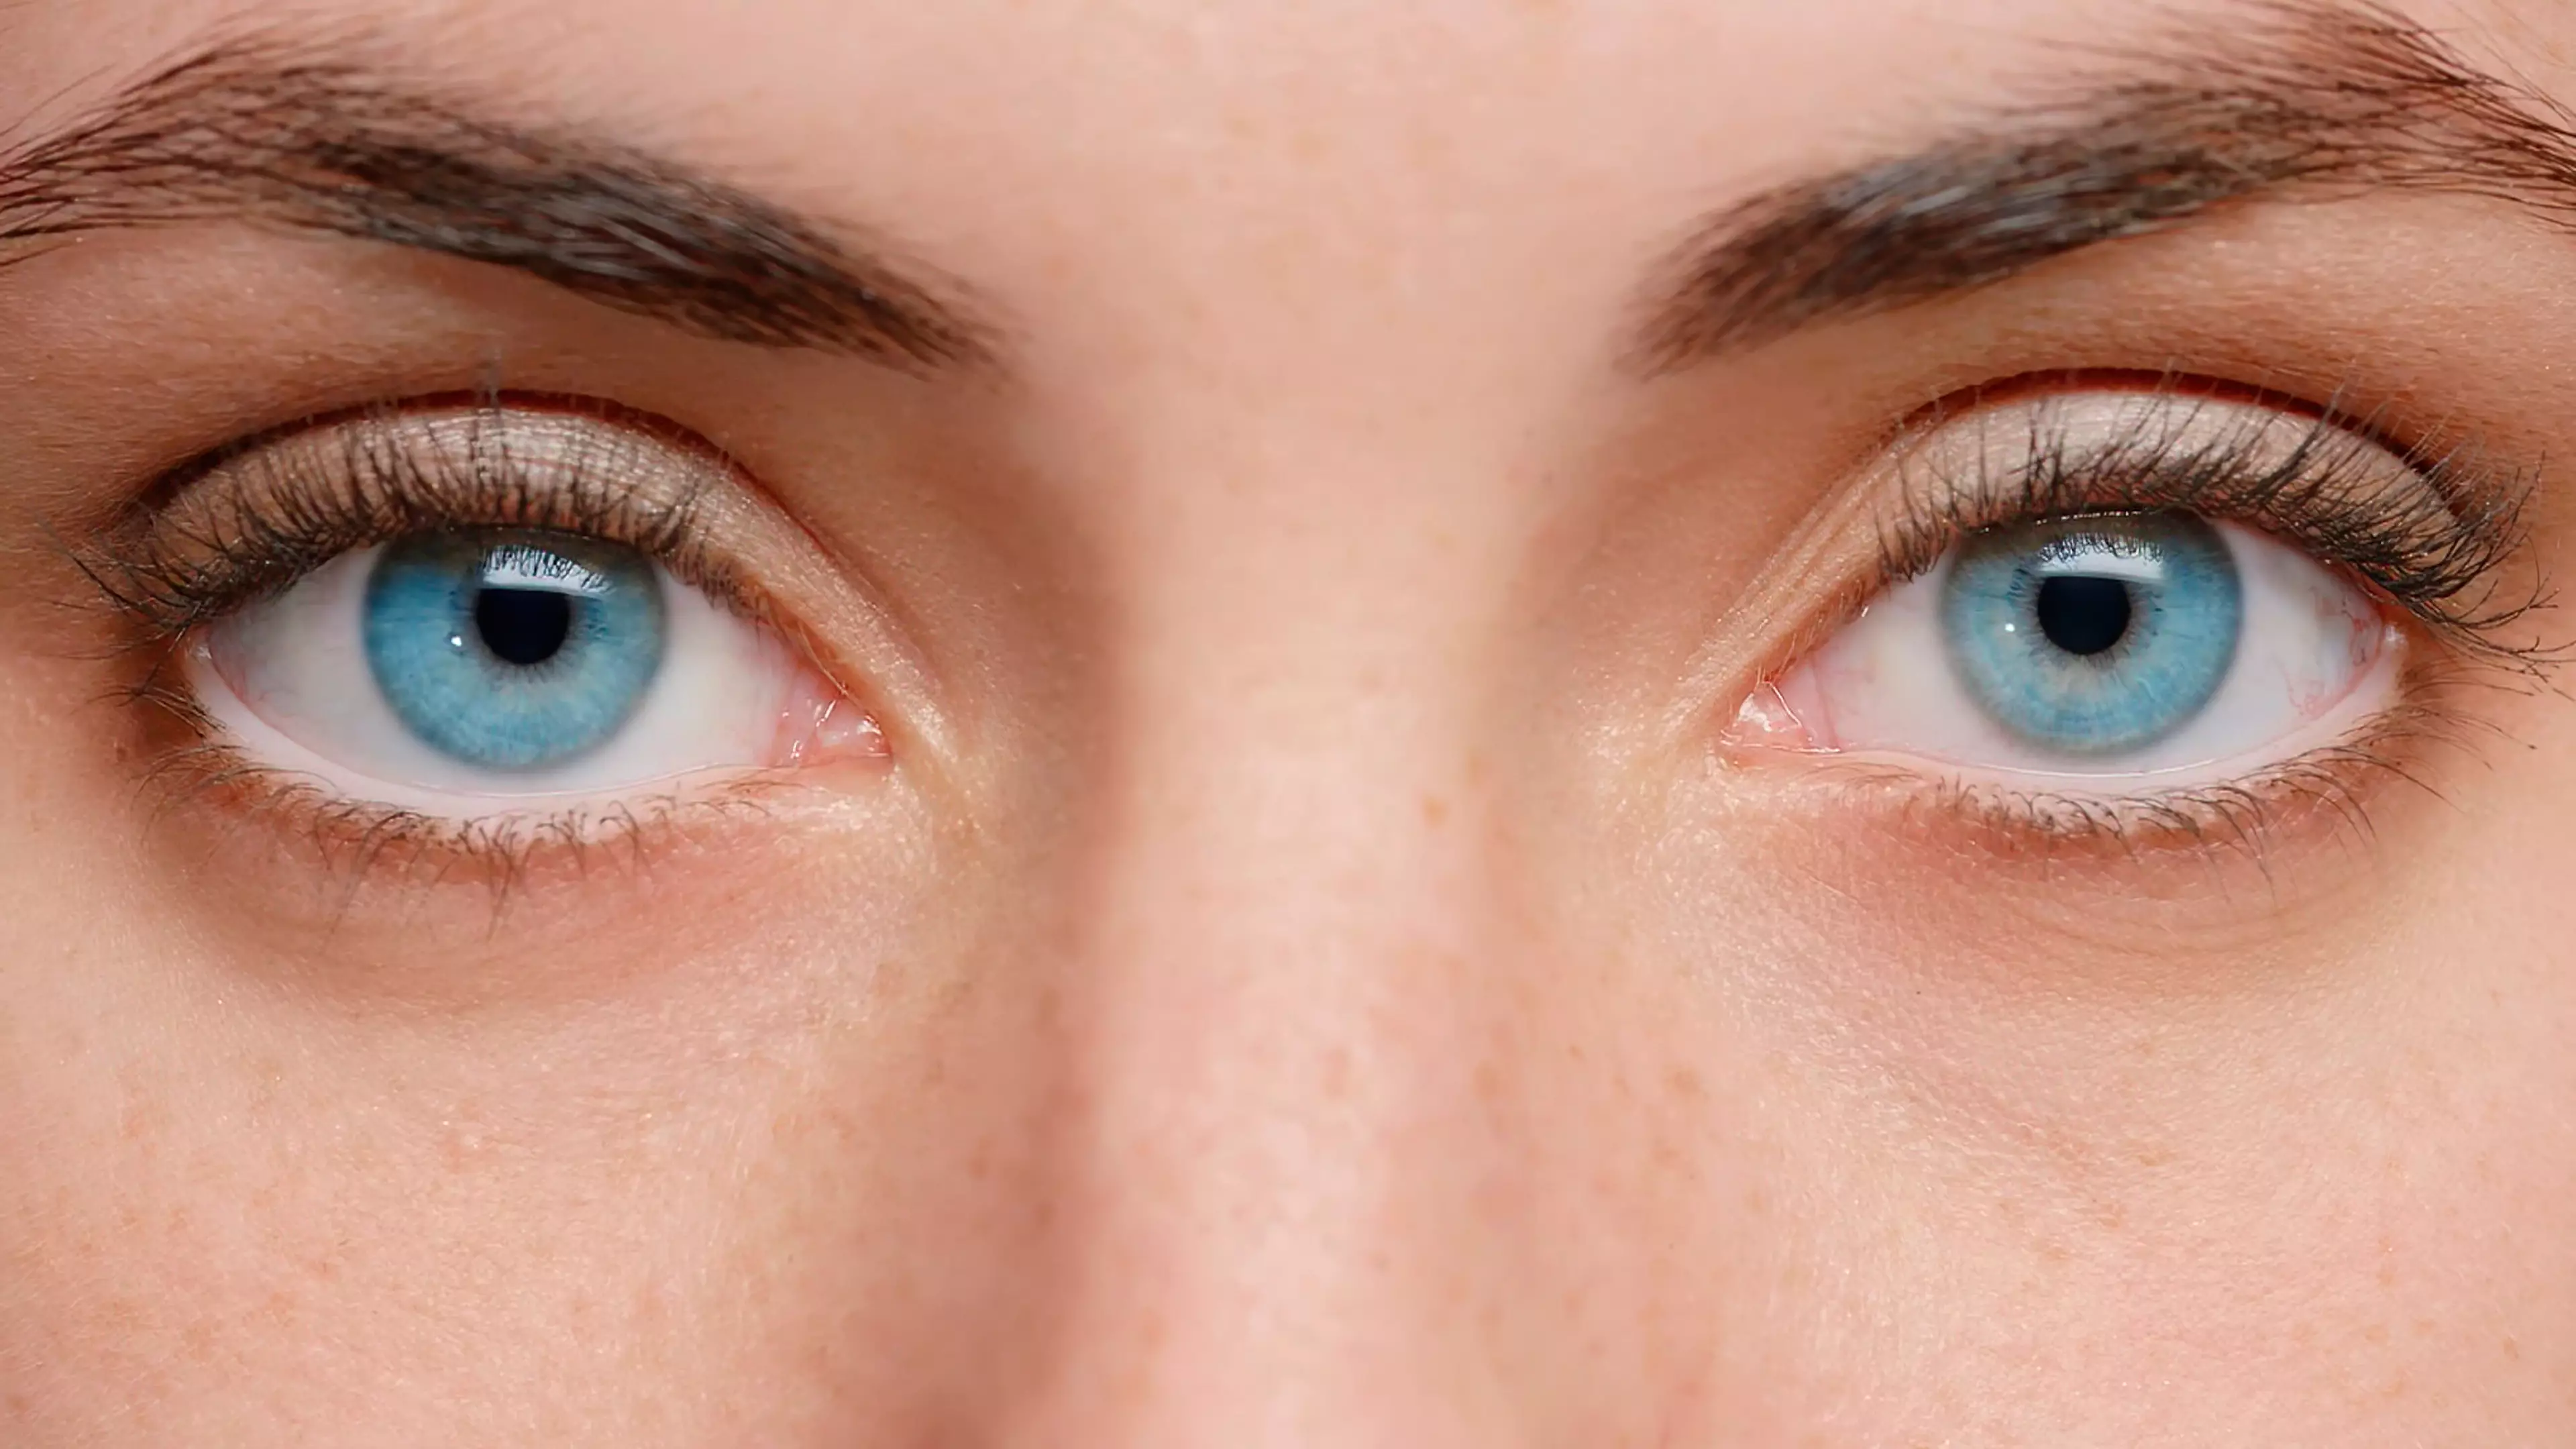 It's reported that blue eyes don't usually change colour (